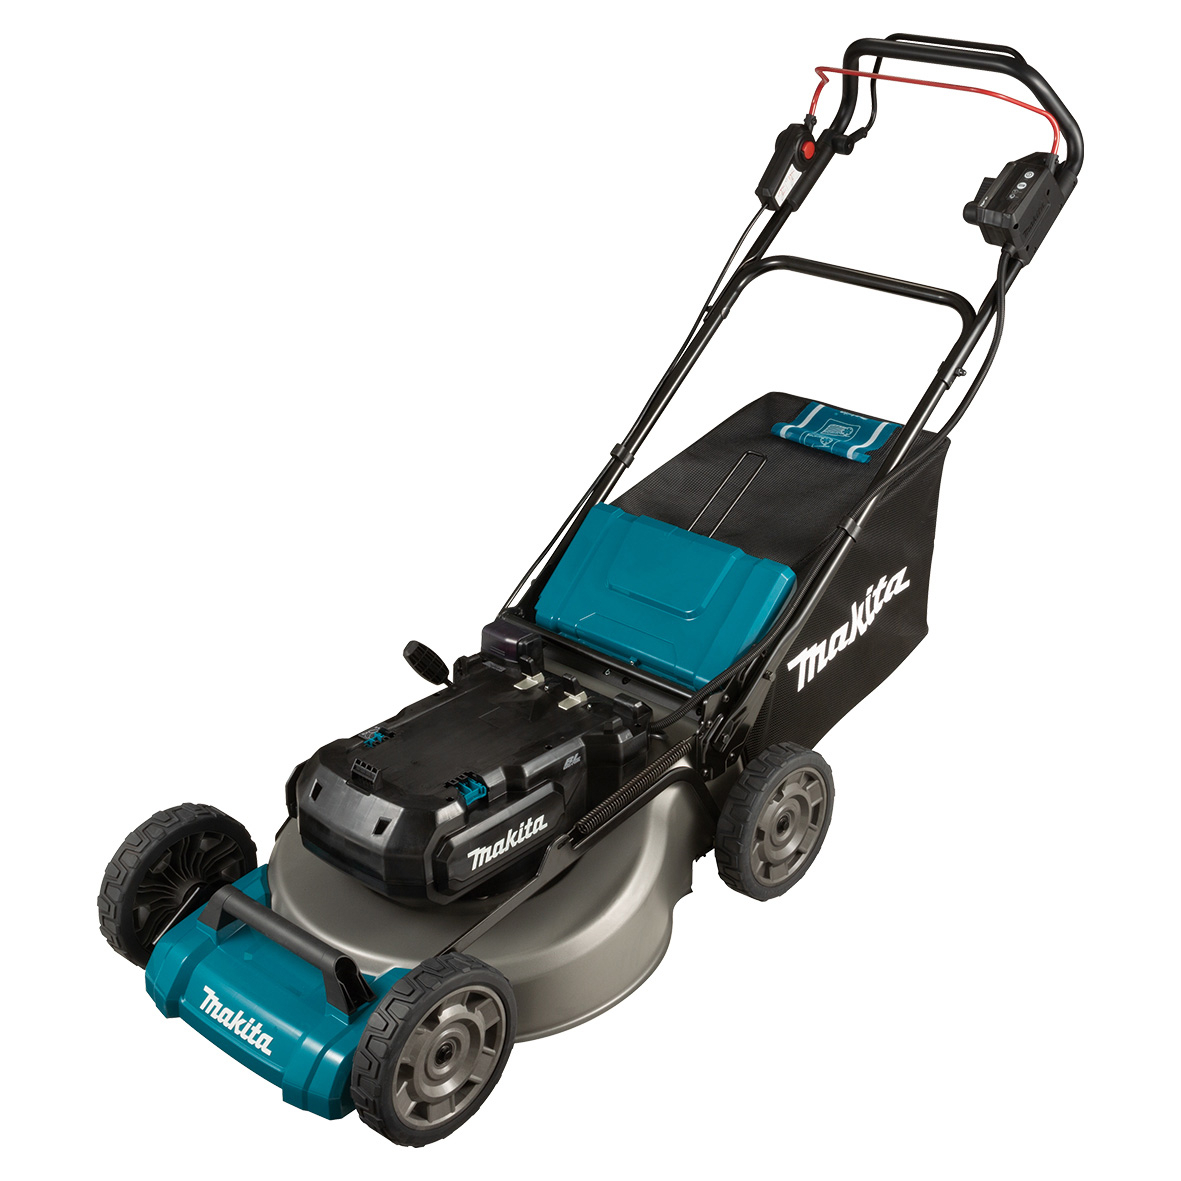 Makita 534mm (21") Brushless Self Propelled Lawn Mower (tool only) LM001CZX1